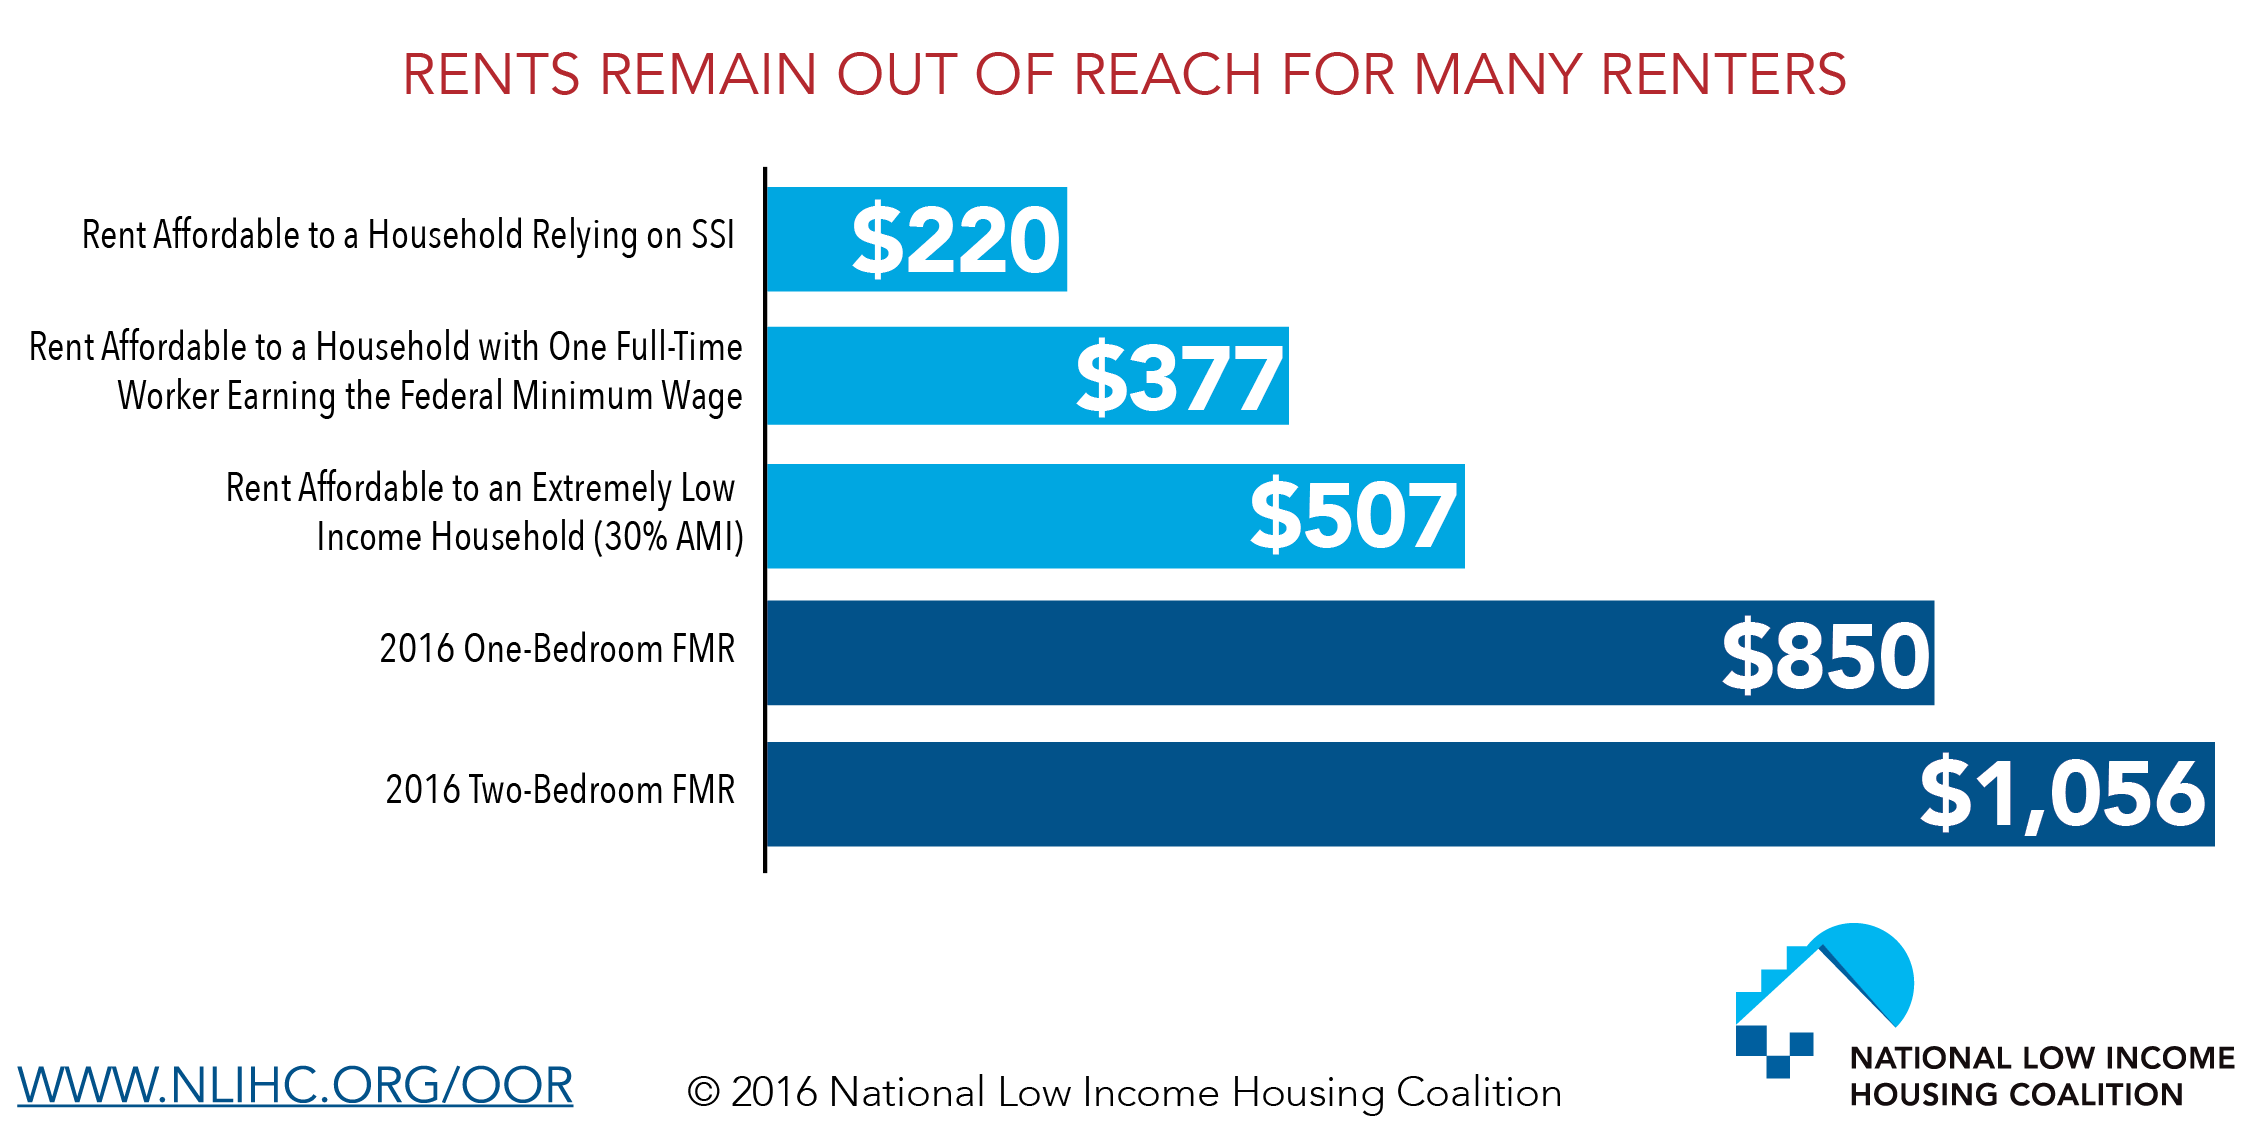 Rents Remain Out of Reach for Many Renters